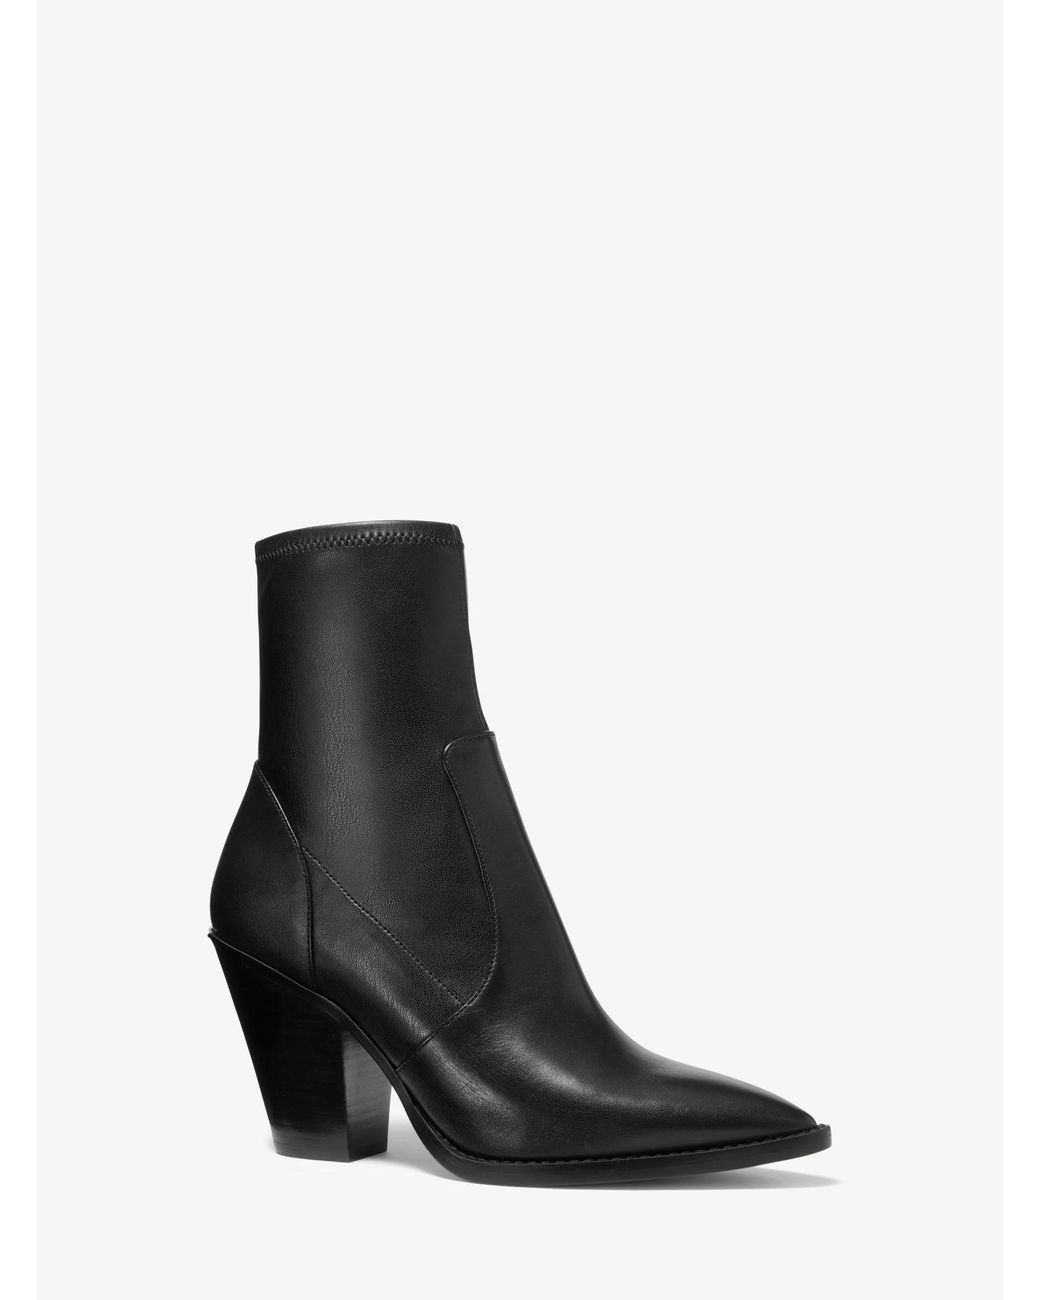 Michael Kors Dover Leather Ankle Boot in Black | Lyst